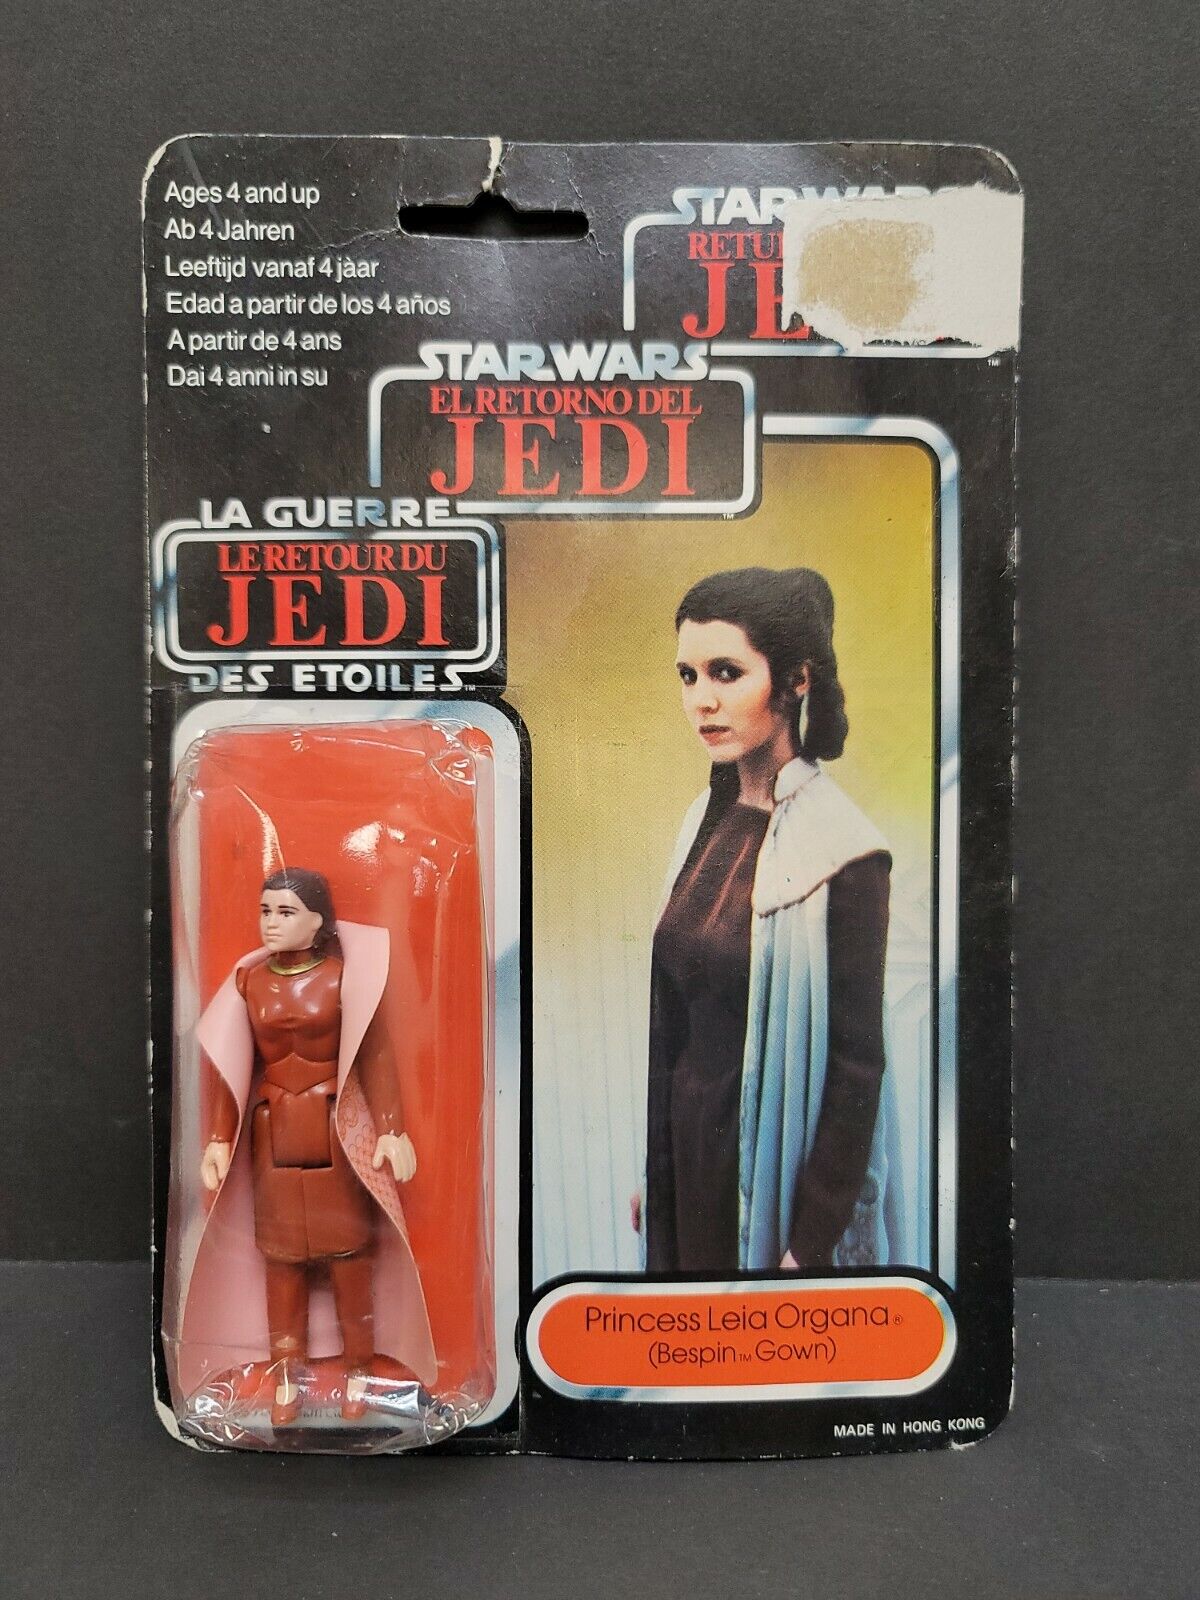 Princess Leia Organa (Bespin Gown) sold